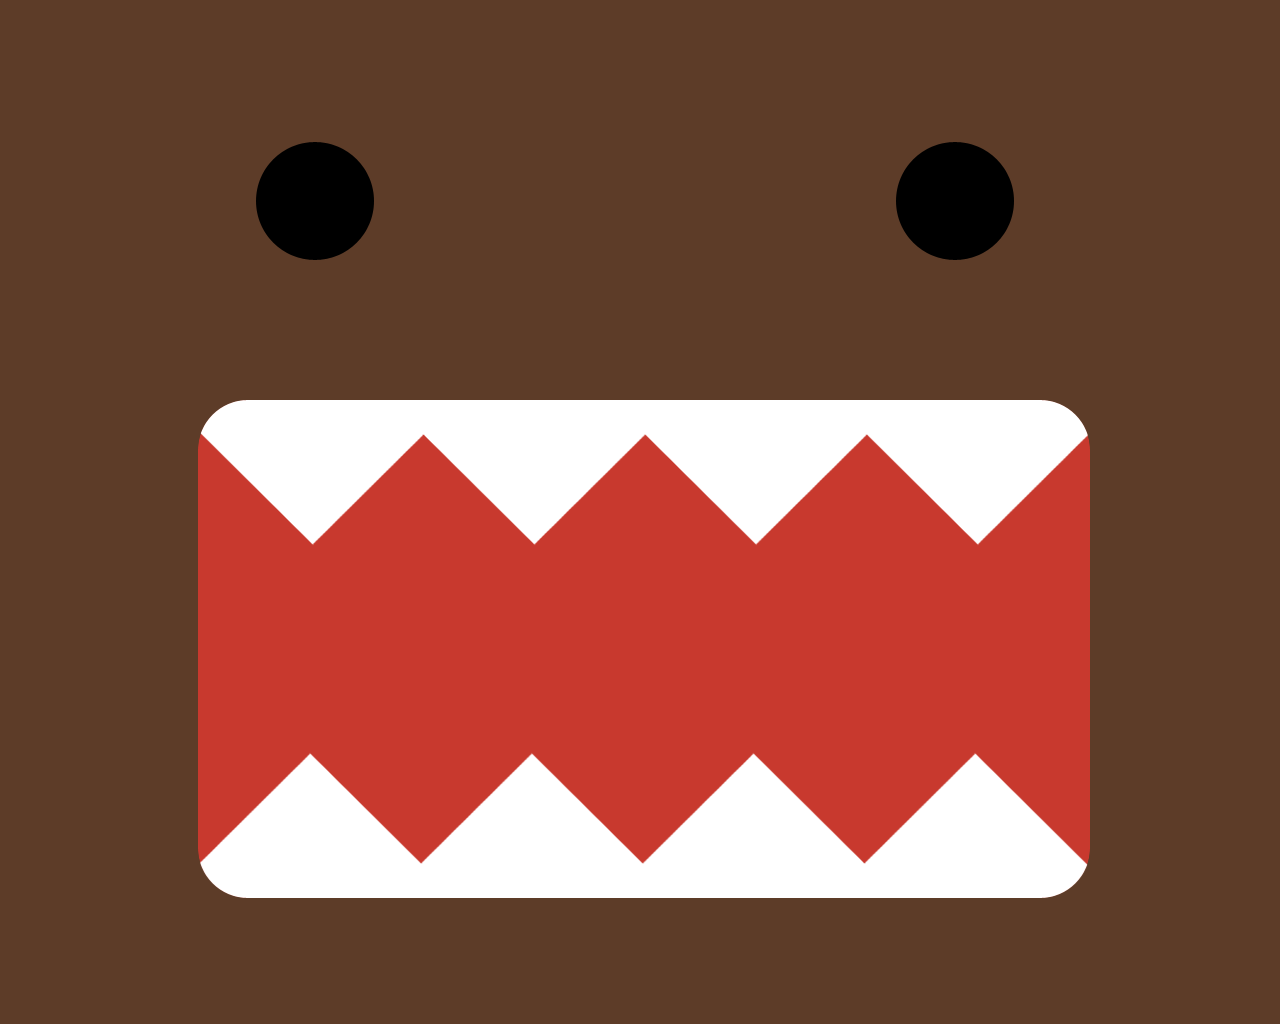 Free download Domo Forever 500x334 for your Desktop Mobile  Tablet   Explore 45 Cute Domo Wallpapers  Wallpapers Cute Domo Kun Wallpaper  Backgrounds Cute